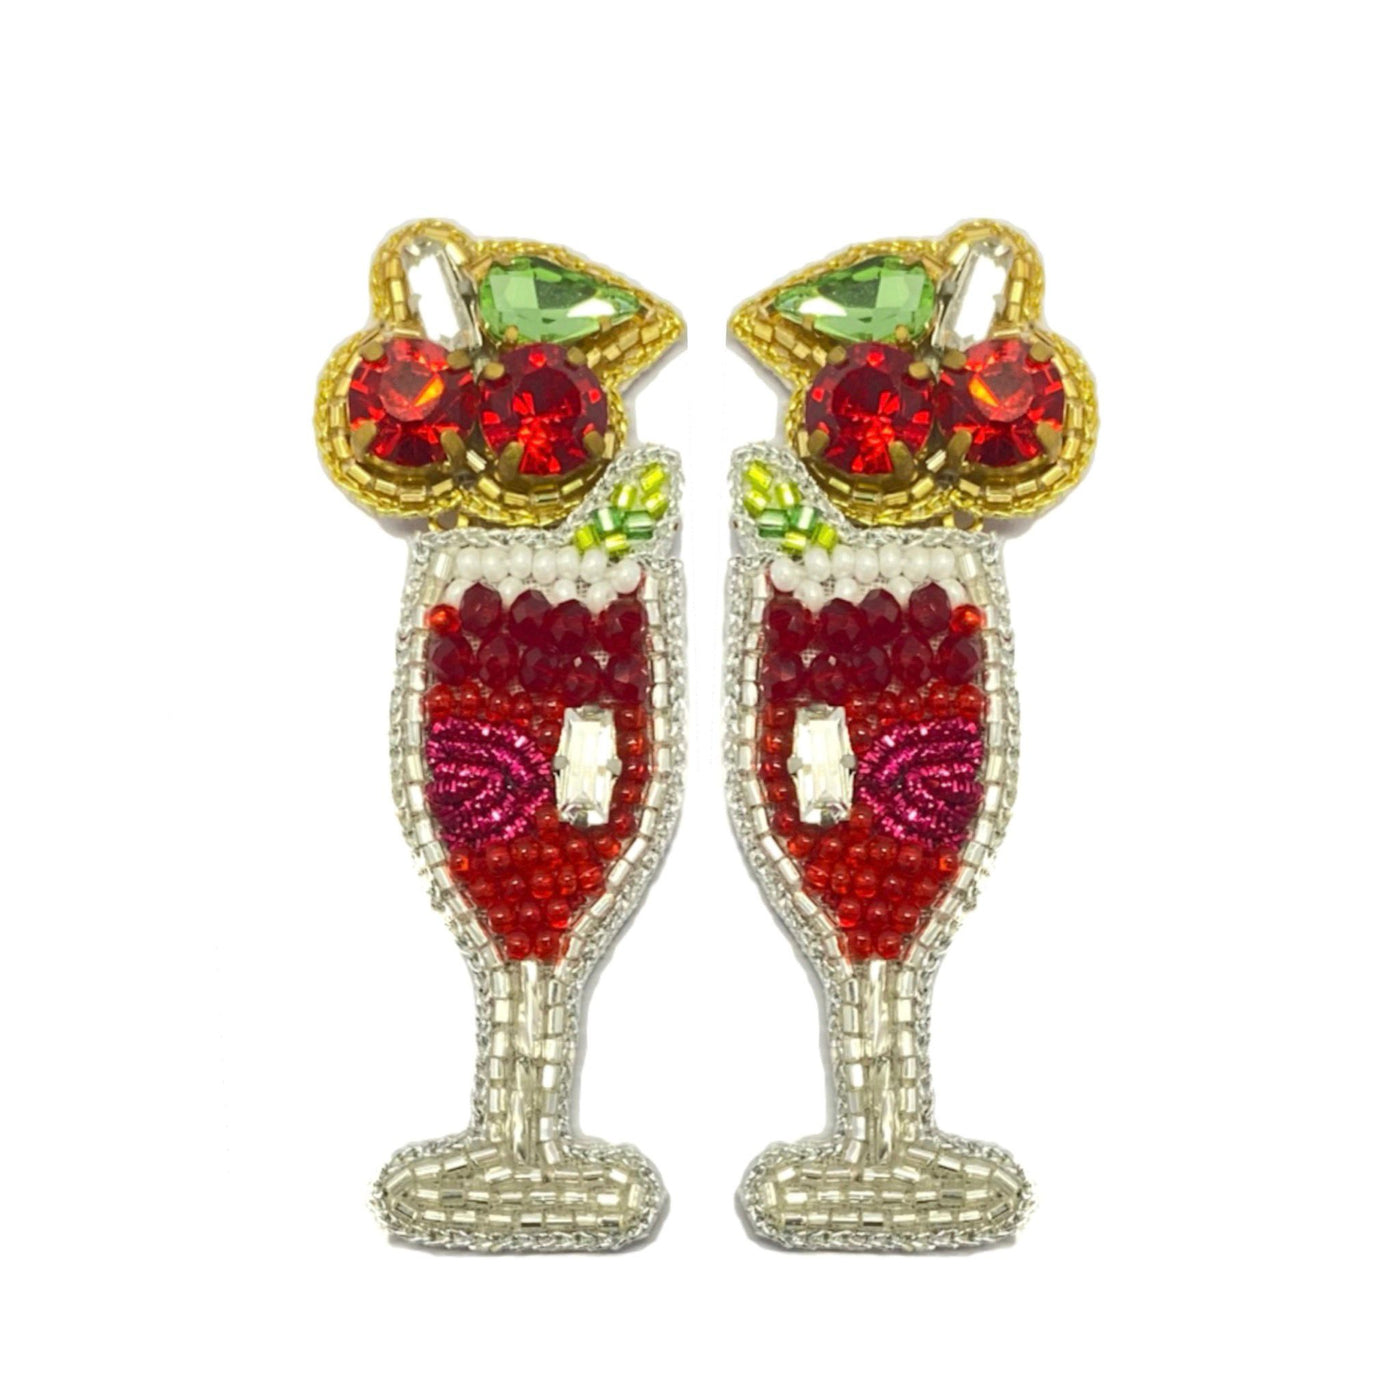 Holiday Cranberry Cocktail Stud Earrings - Dangle